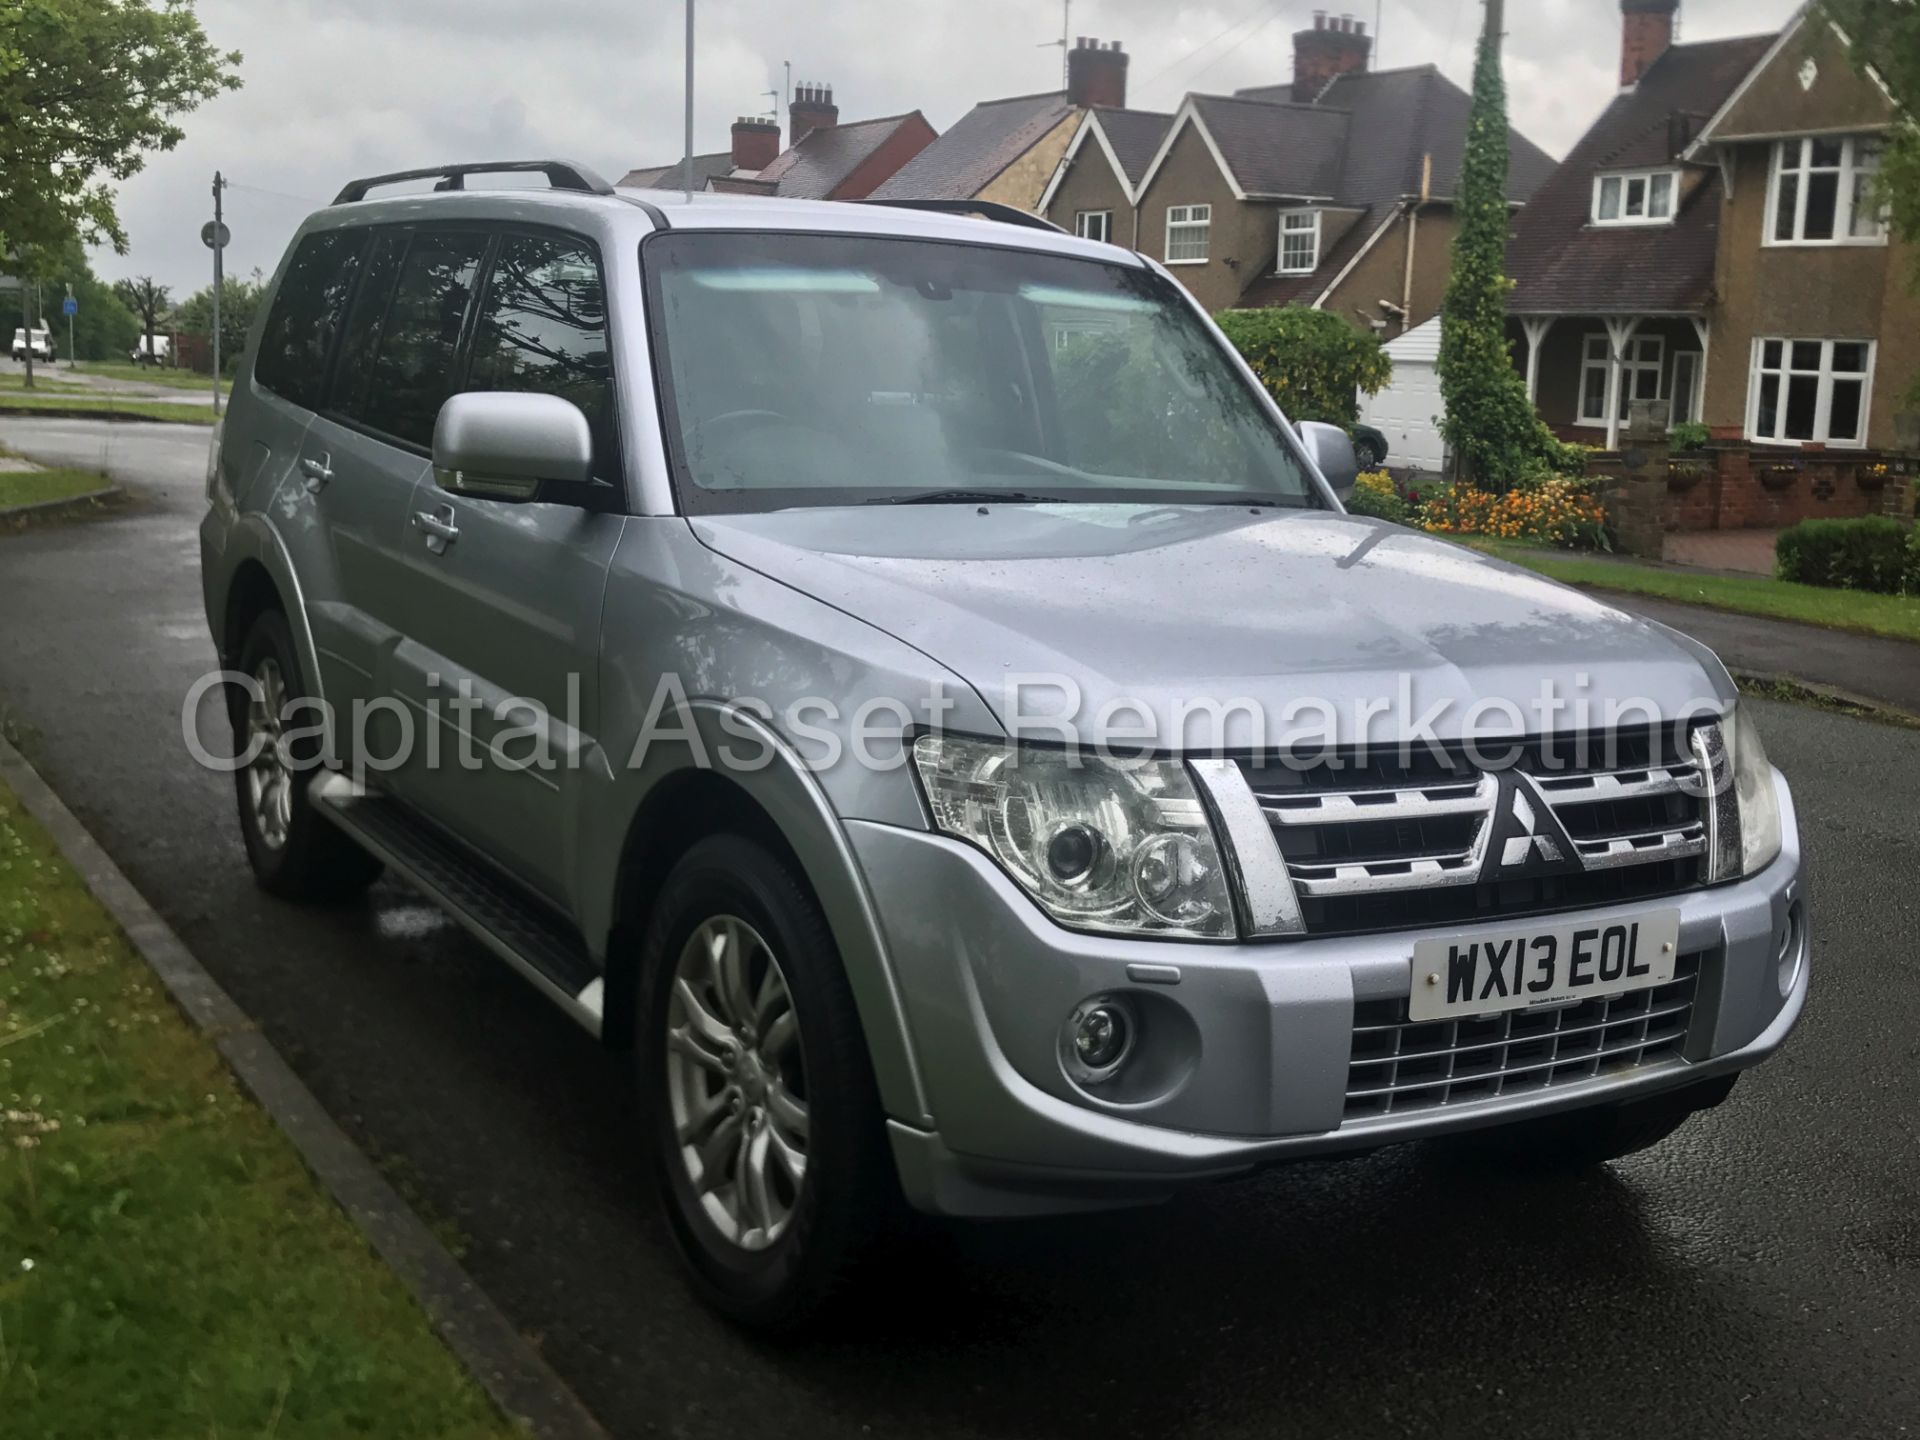 MITSUBISHI SHOGUN 'LWB - 7 SEATER' (2013) '3.2 DI-D - AUTO - LEATHER - SAT NAV' (1 OWNER FROM NEW) - Image 9 of 30